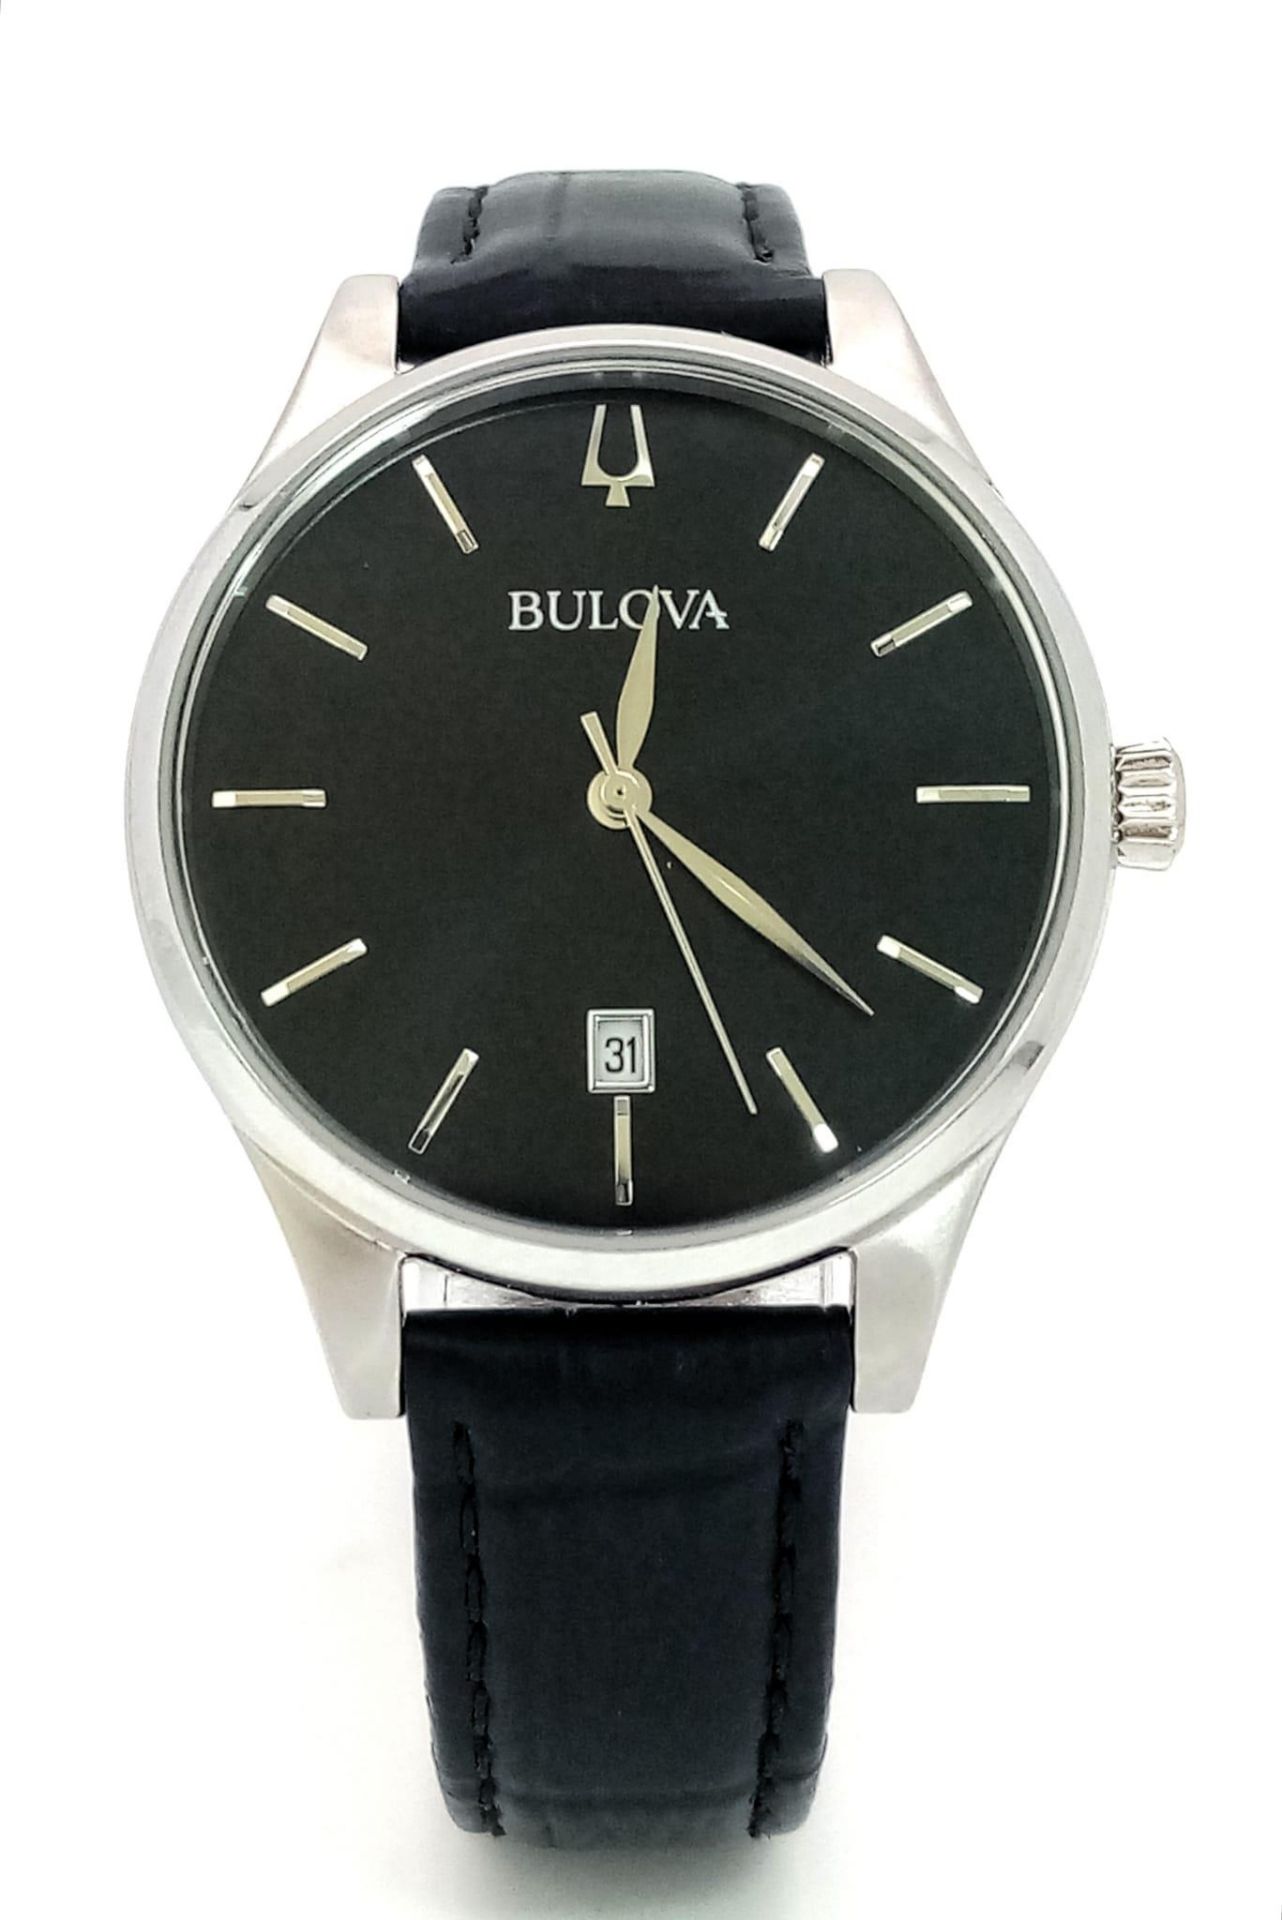 A Classic Bulova Quartz Unisex Watch. Black leather strap. Stainless steel case - 36mm. Black dial - Image 2 of 6